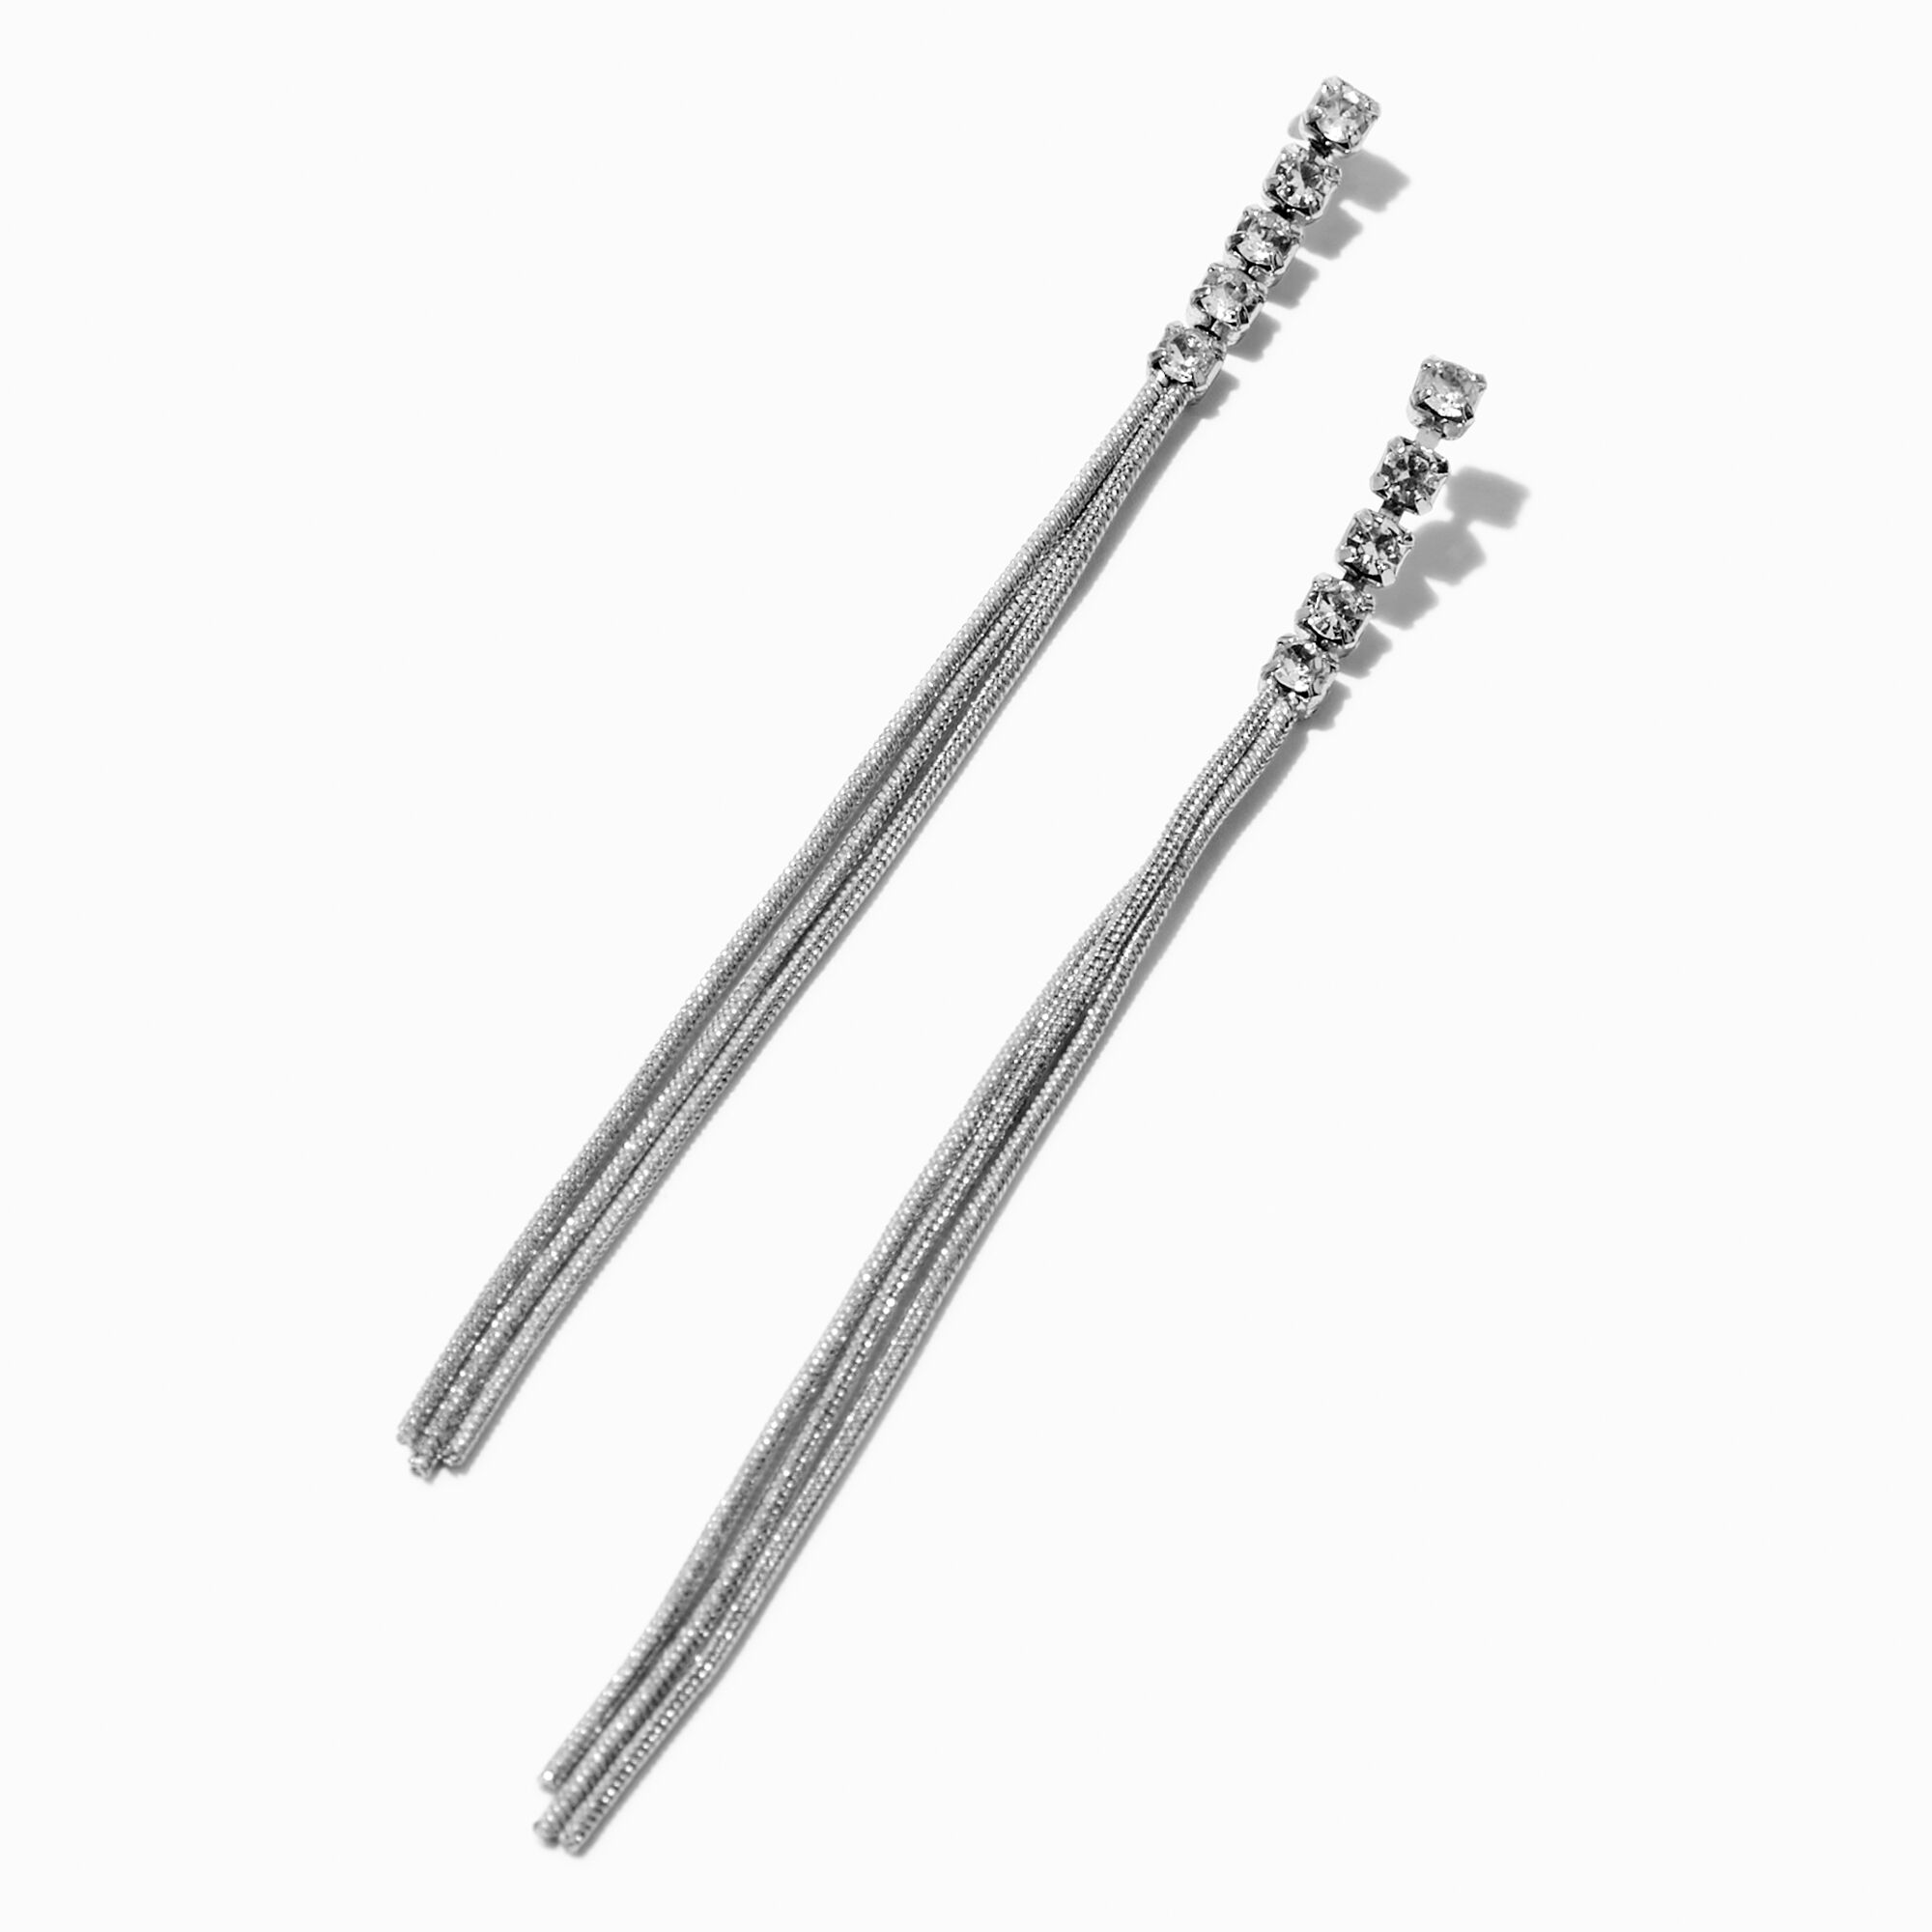 View Claires Tone Slinky Cupchain 4 Linear Drop Earrings Silver information